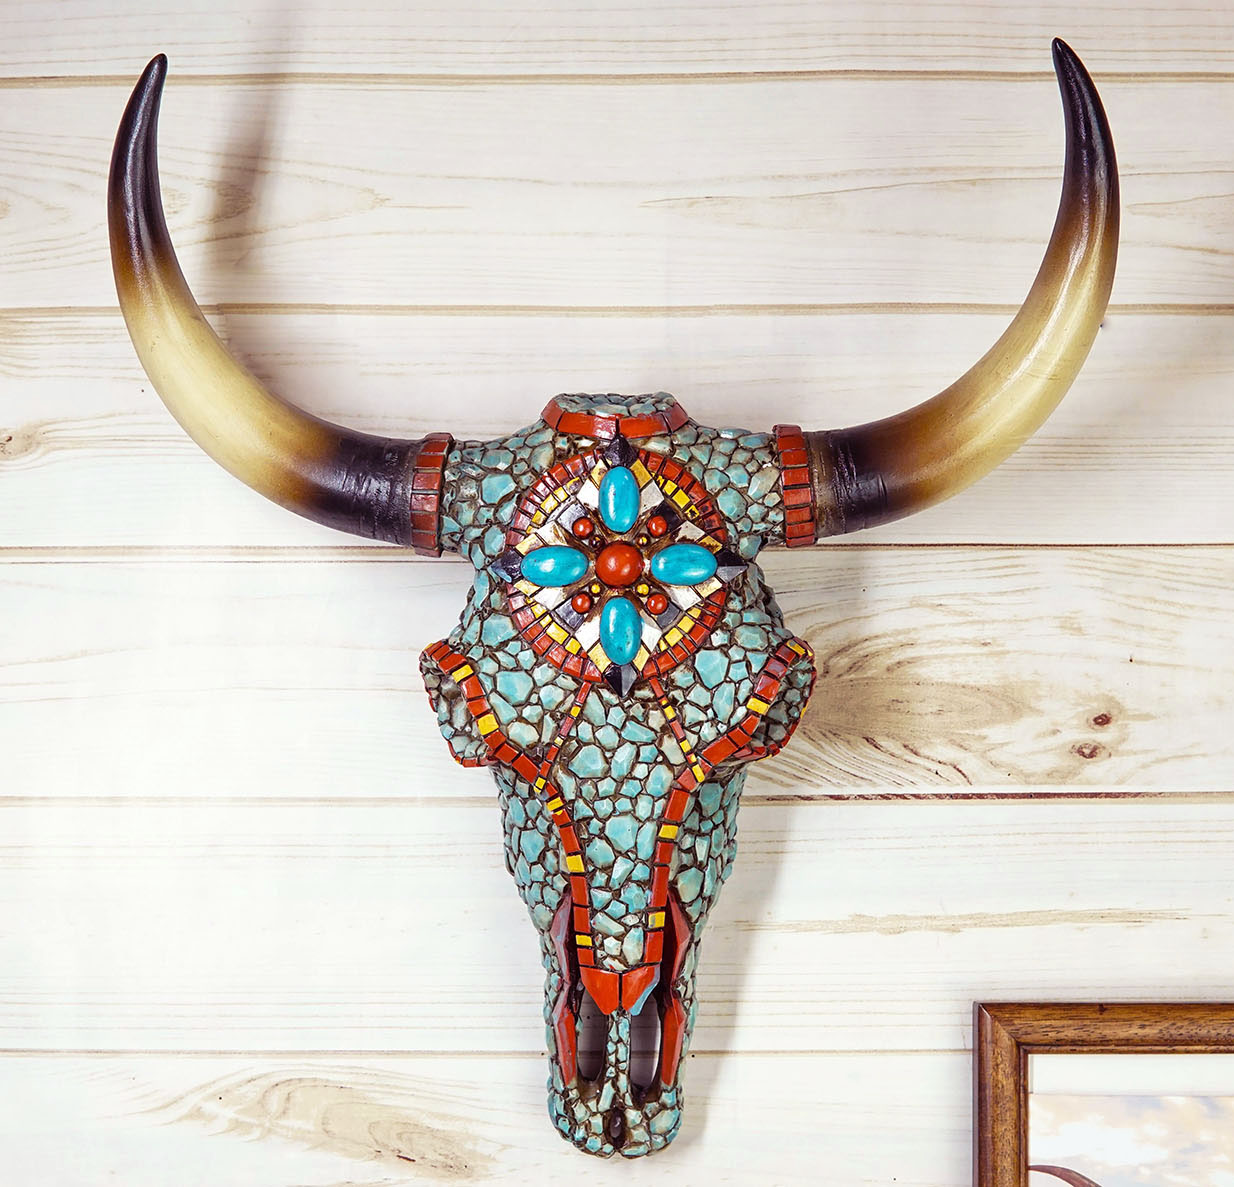 Large Western Steer Cow Skull With Mosaic Turquoise Stones And Beads Wall Decor - image 1 of 6